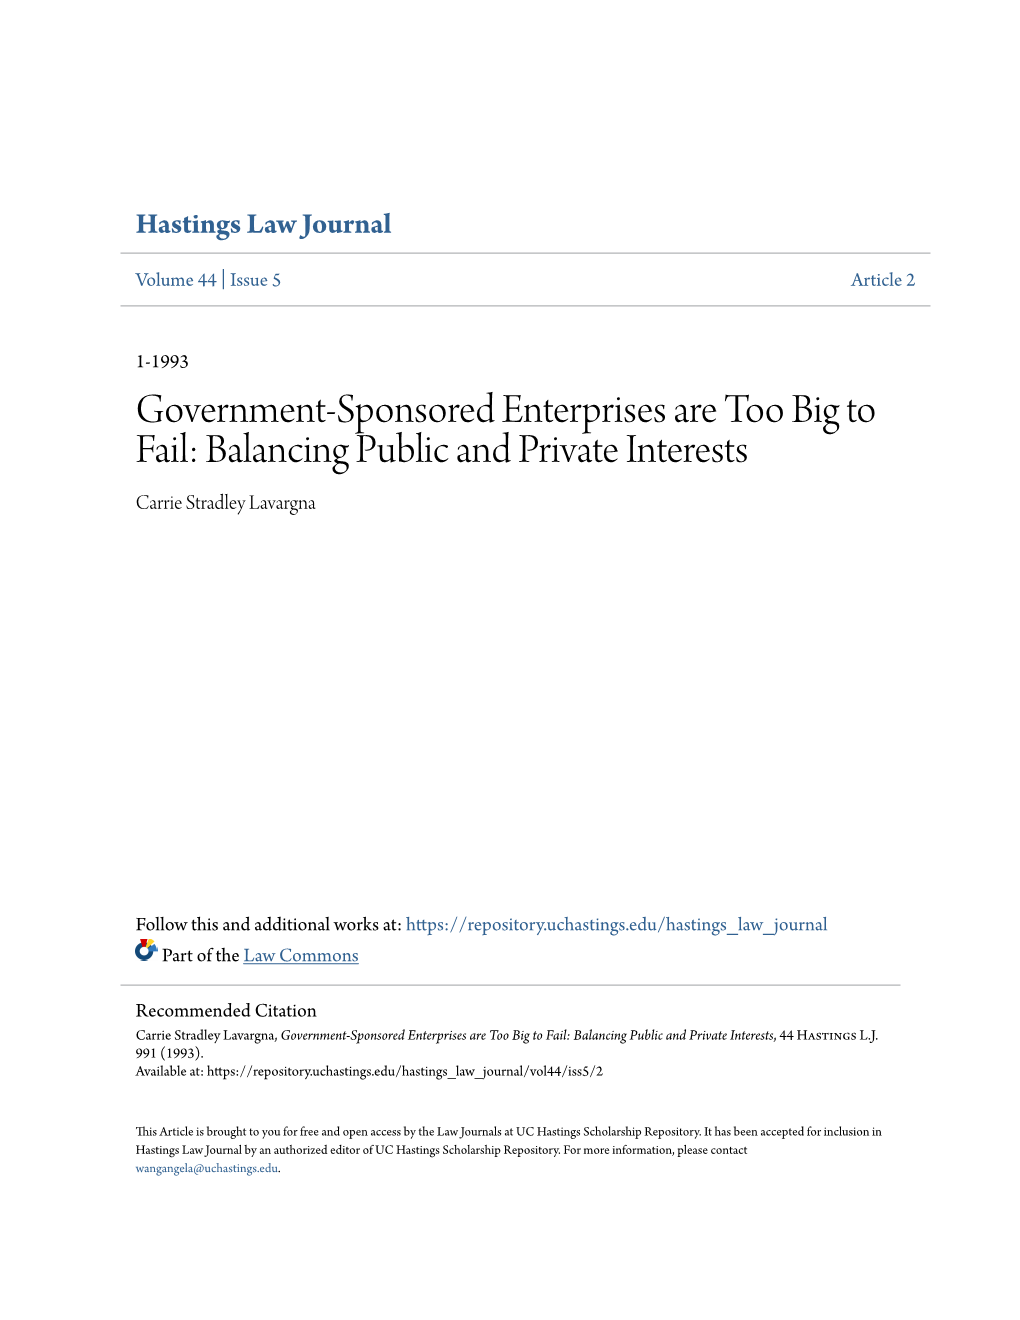 Government-Sponsored Enterprises Are Too Big to Fail: Balancing Public and Private Interests Carrie Stradley Lavargna